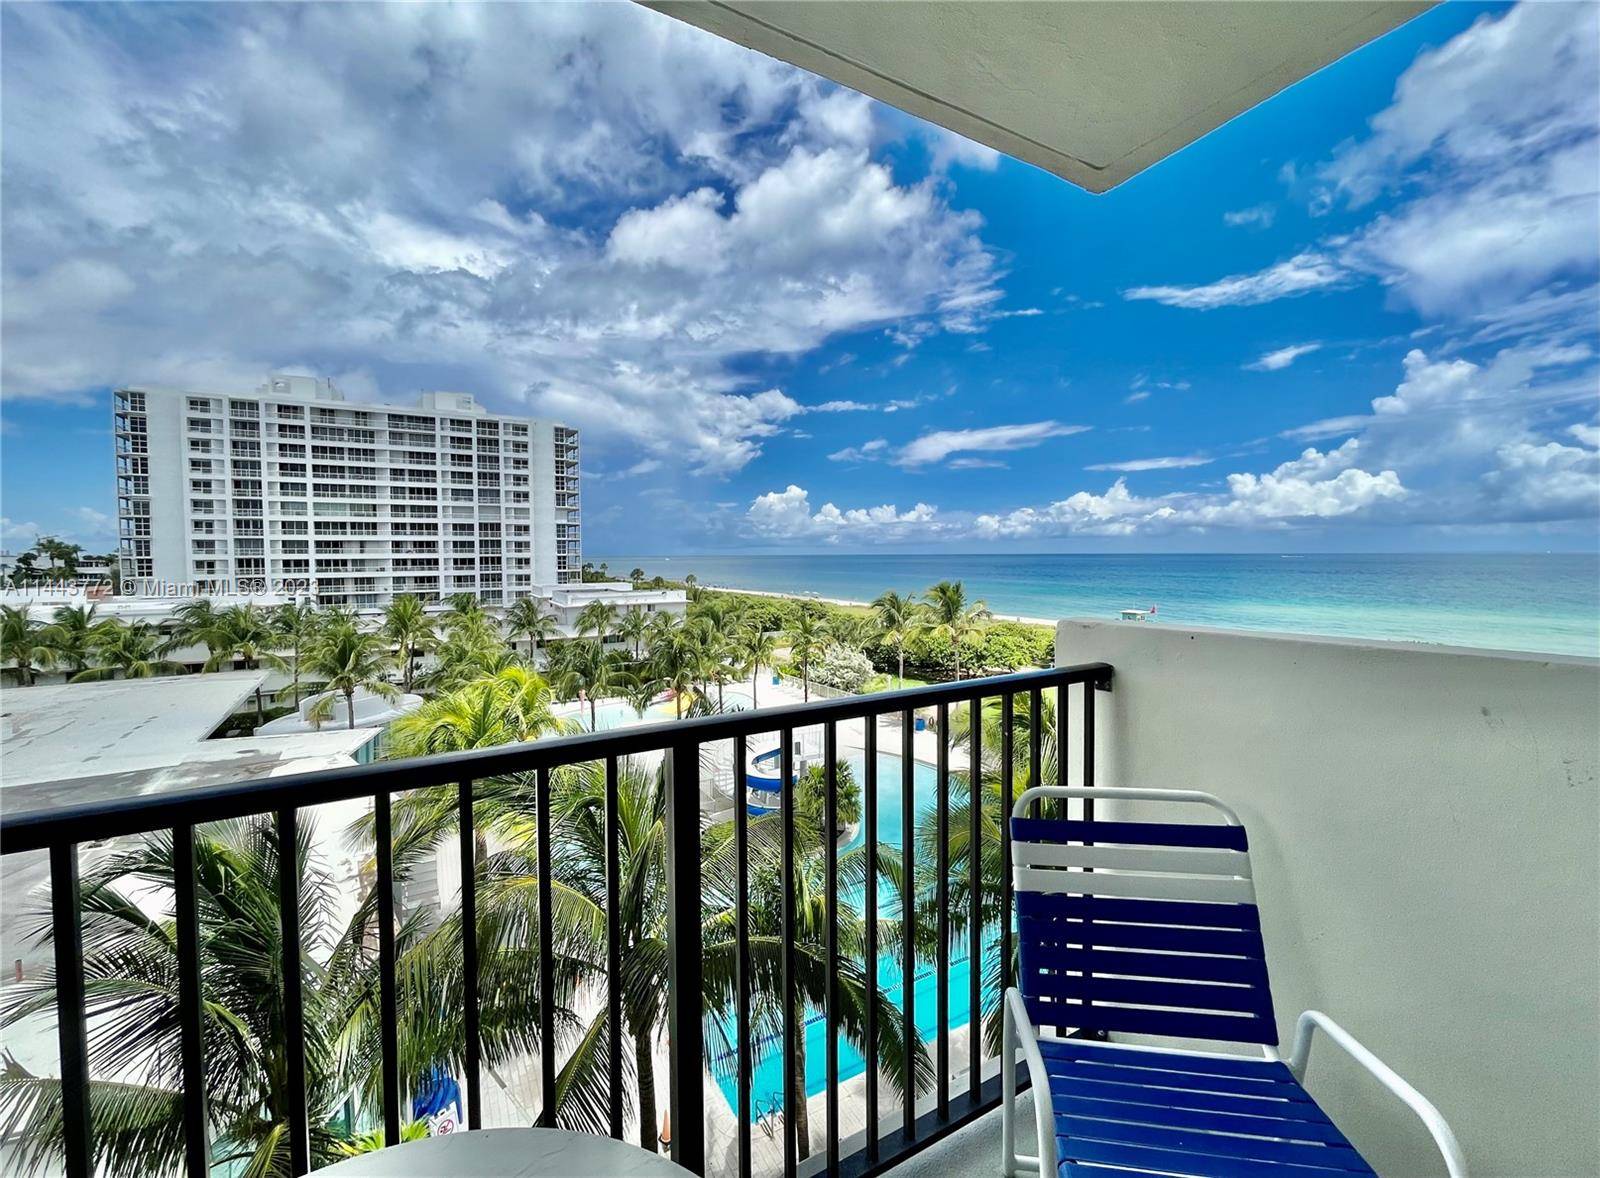 Enjoy breathtaking ocean views and a prime Surfside location with this fully furnished condo at The Manatee.